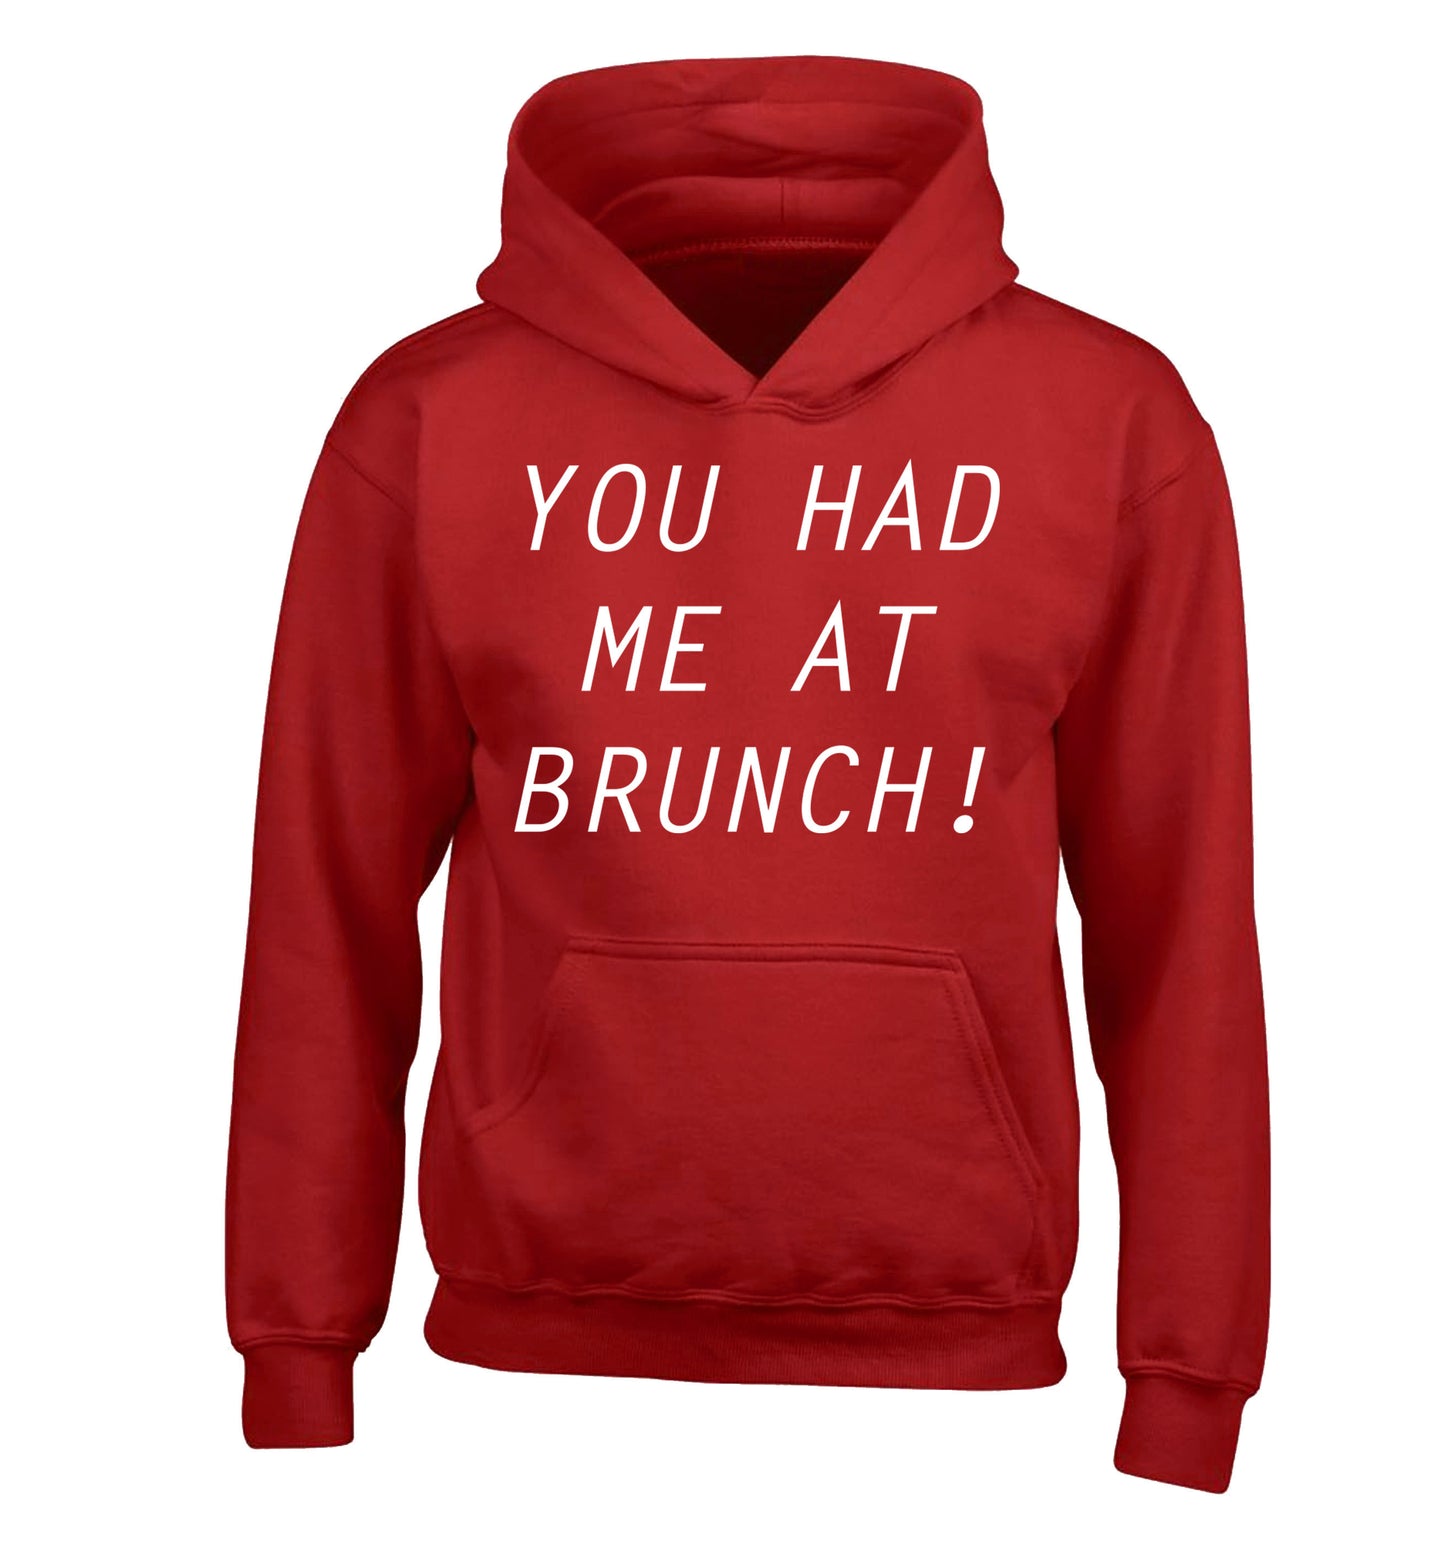 You had me at brunch children's red hoodie 12-14 Years